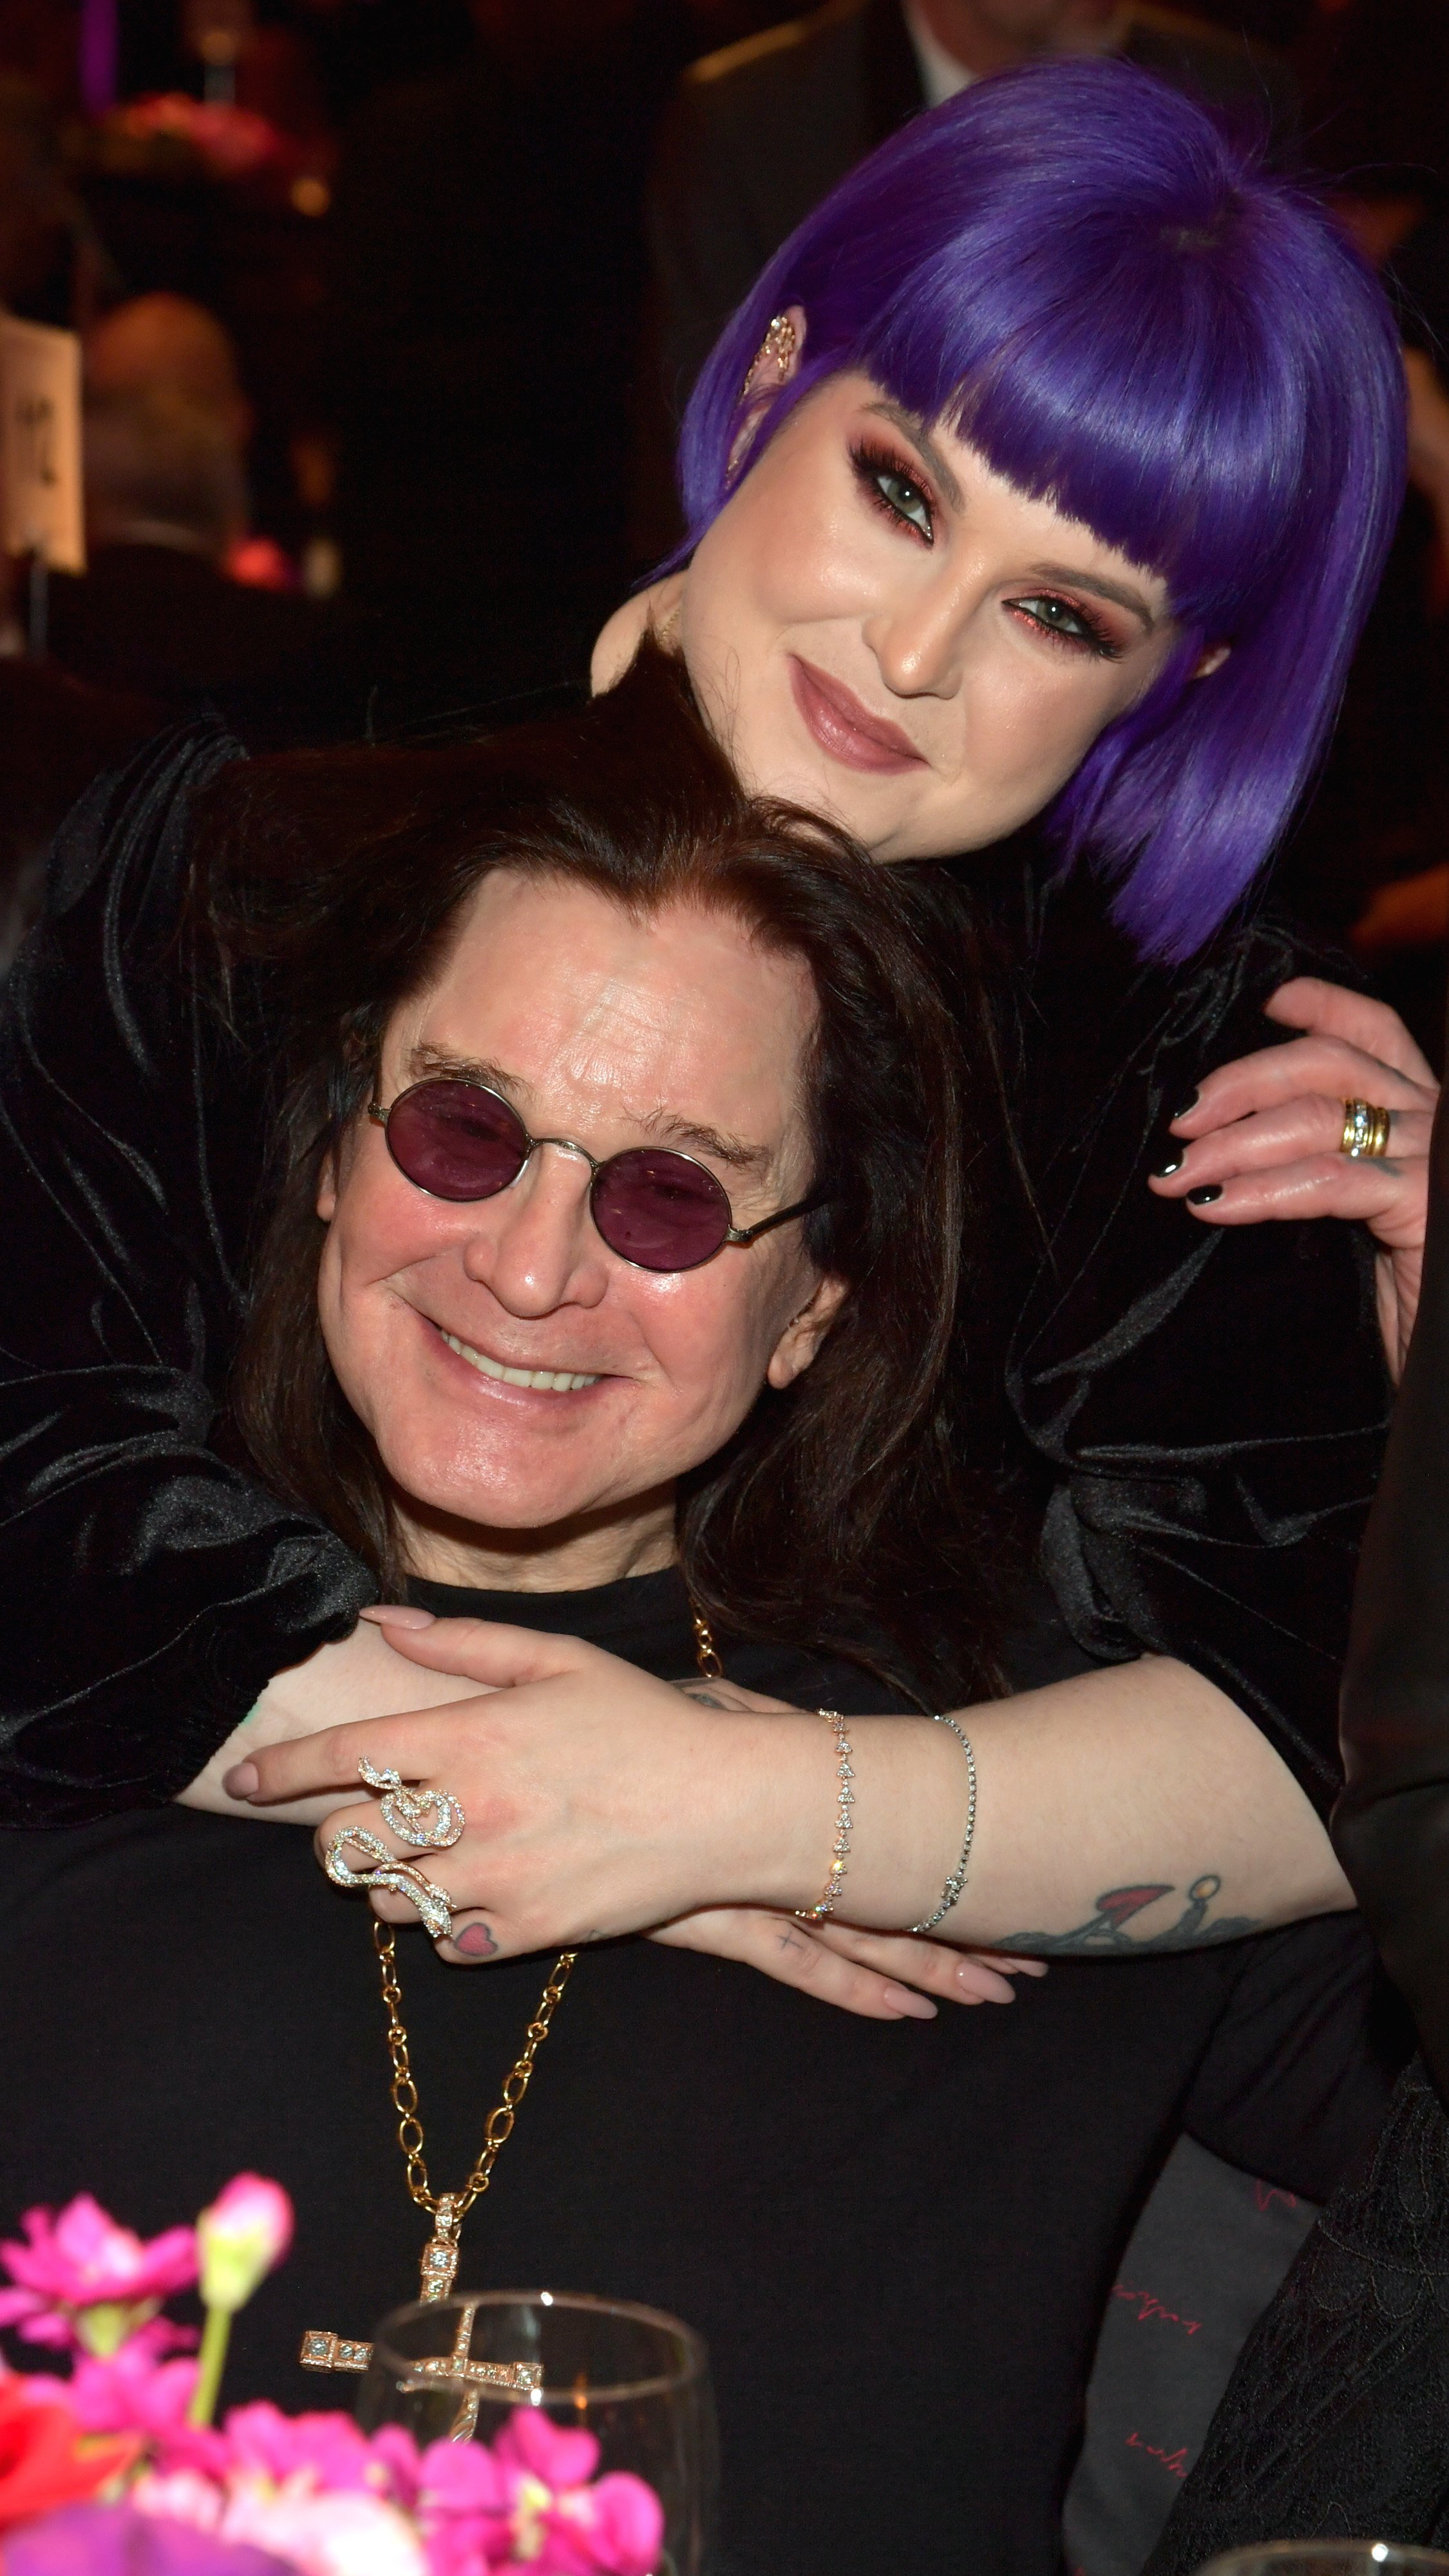 Kelly Osbourne and Ozzy Osbourne at the Pre-GRAMMY Gala and GRAMMY Salute to Industry Icons Honoring Sean "Diddy" Combs on January 25, 2020 in Beverly Hills, California. | Source: Getty Images